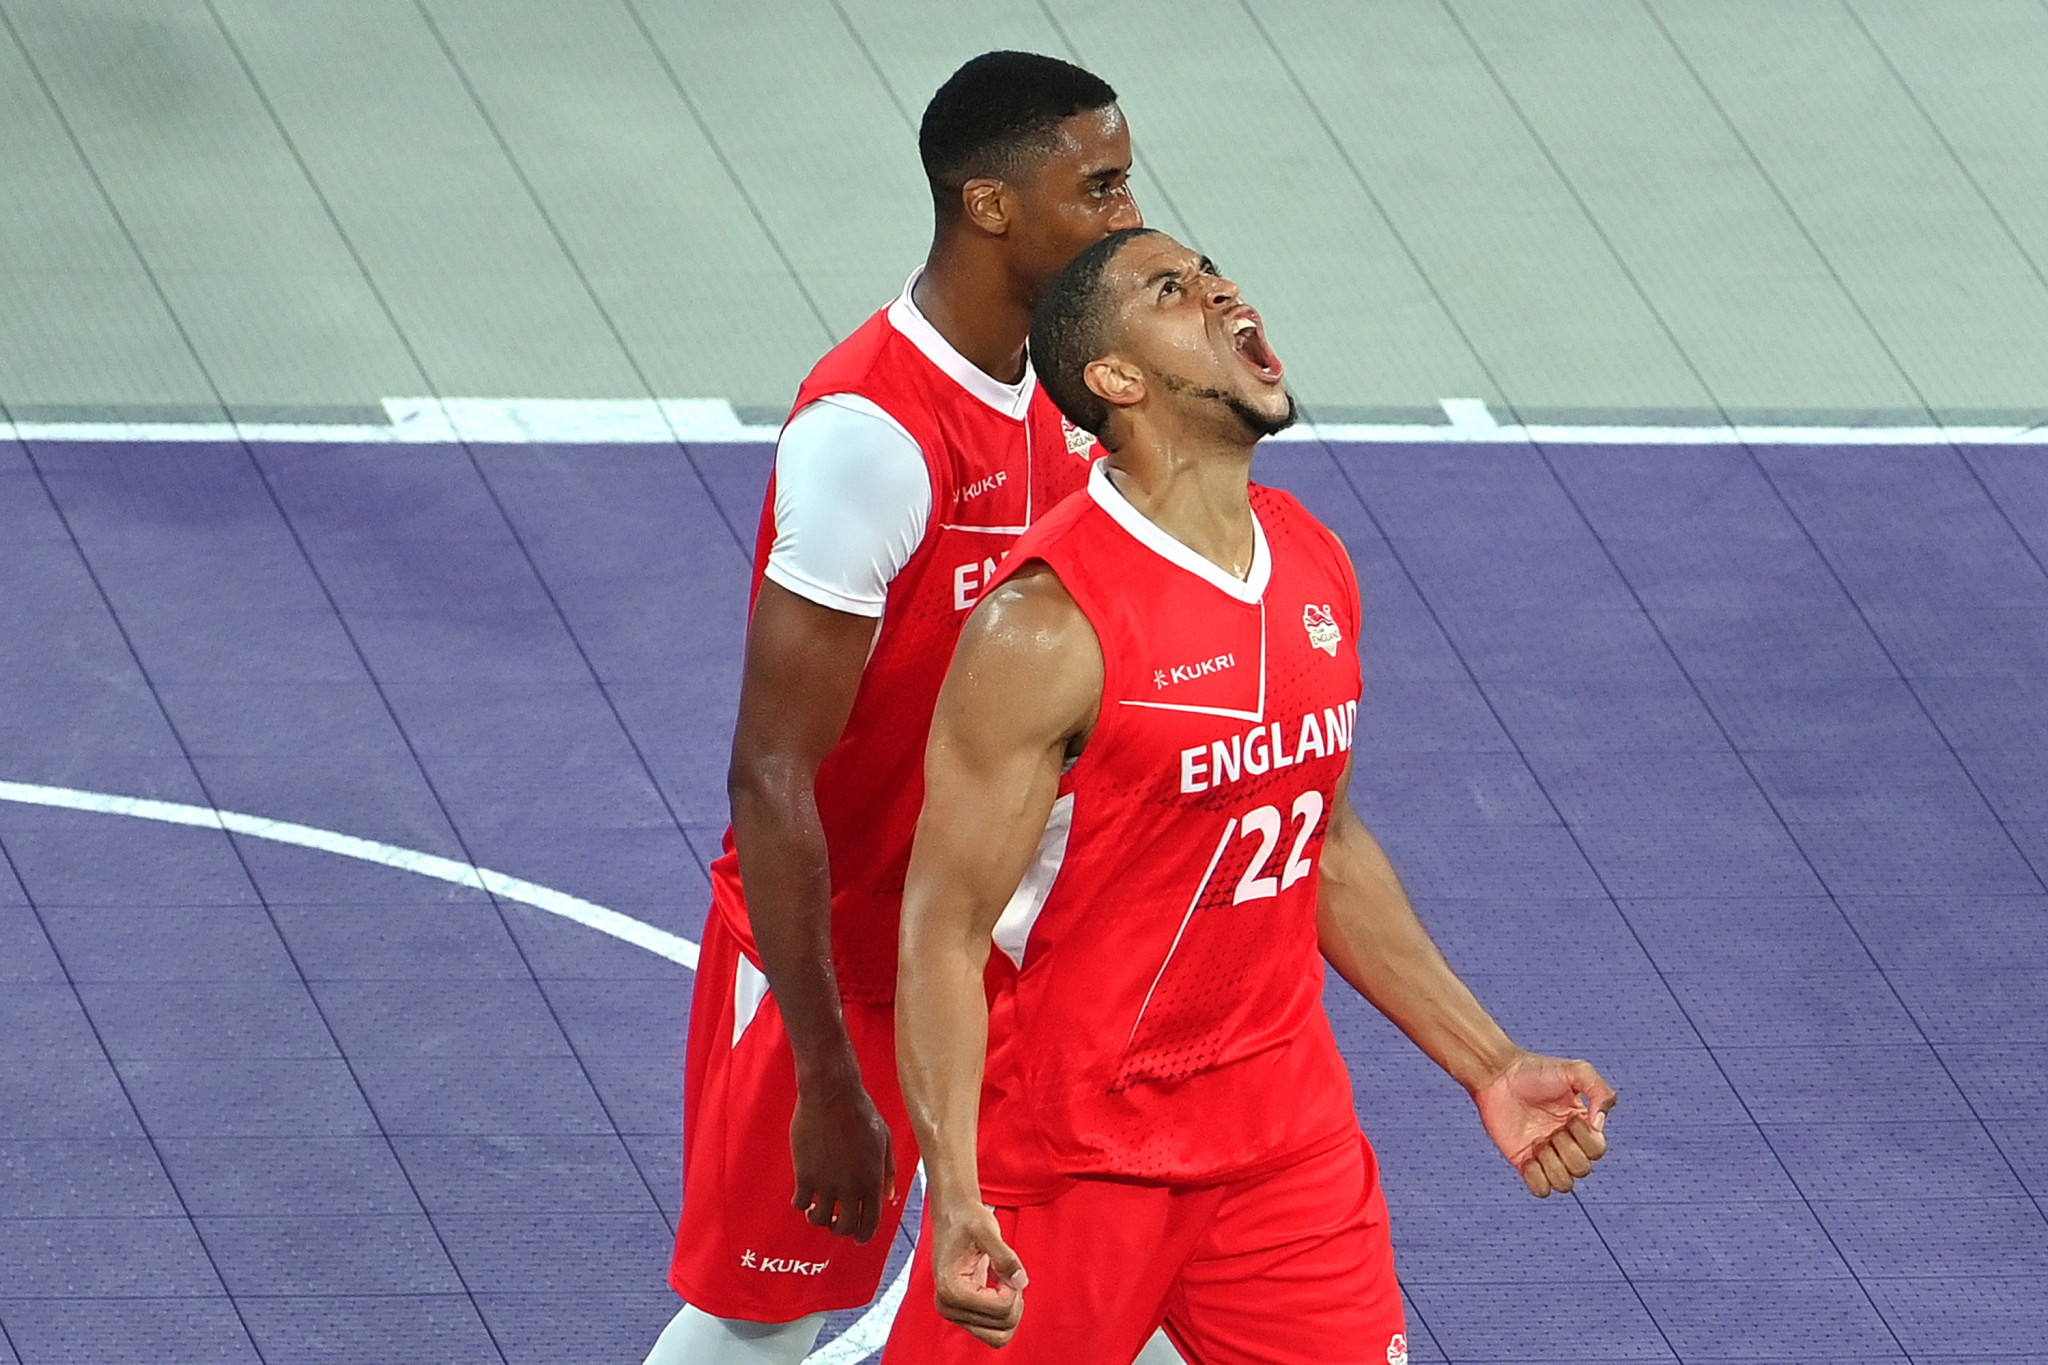 Hesson wins 3x3 basketball Commonwealth Games gold for England in dramatic fashion on home court